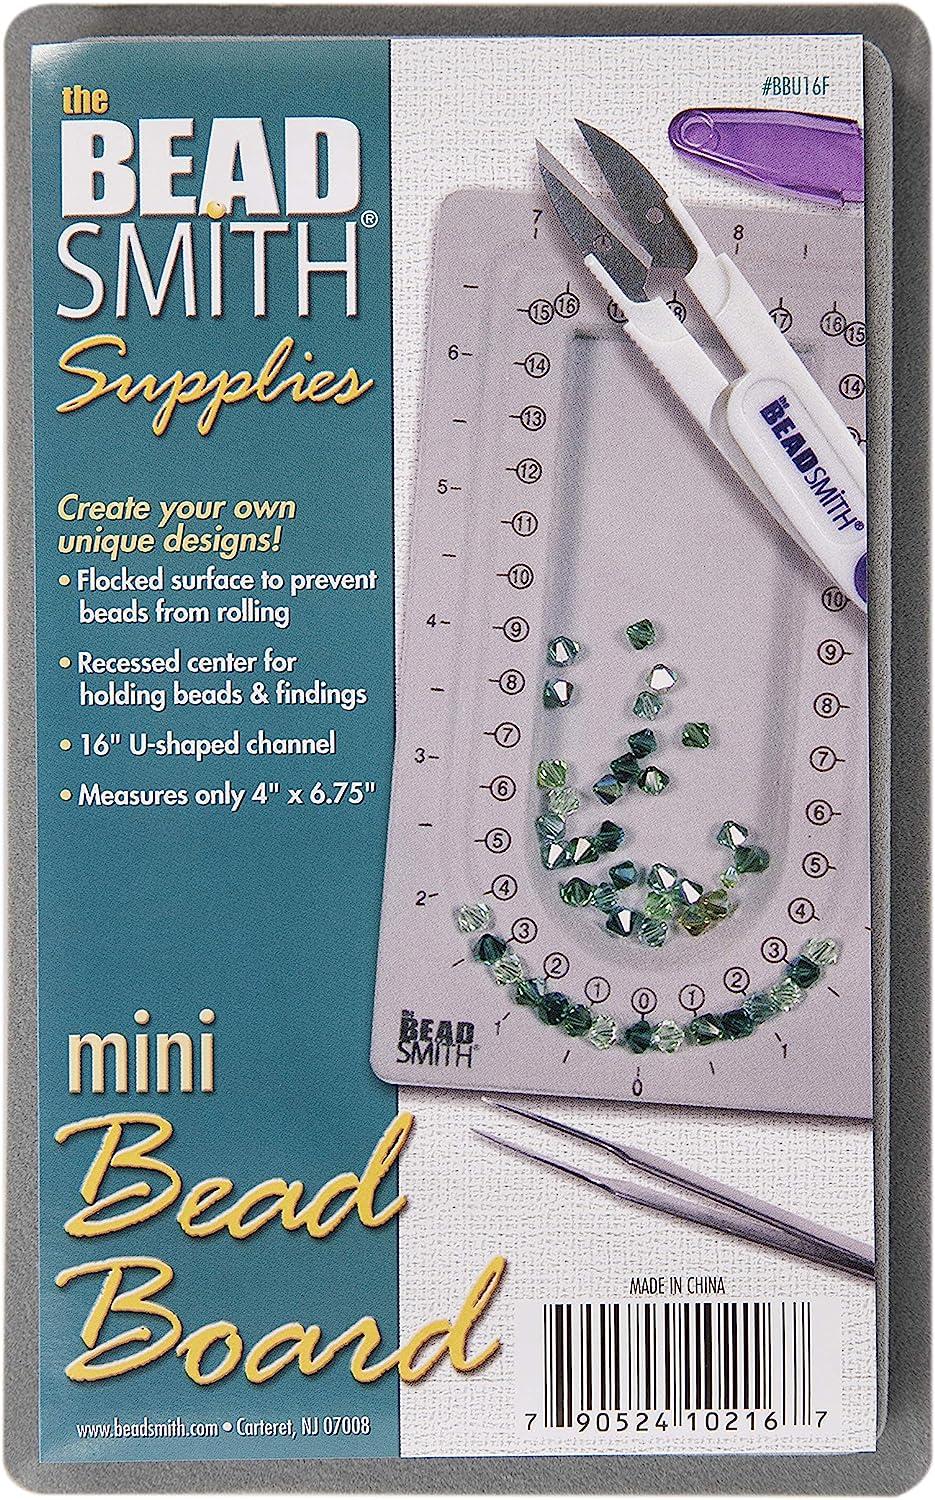  The Beadsmith Bead Board, Grey Flocked, 3 U-Shaped Channels, 6  Recessed Compartments, 9.5 x 13 inches, Design Boards for Creating  Bracelets, Necklaces and Other Jewelry : Arts, Crafts & Sewing